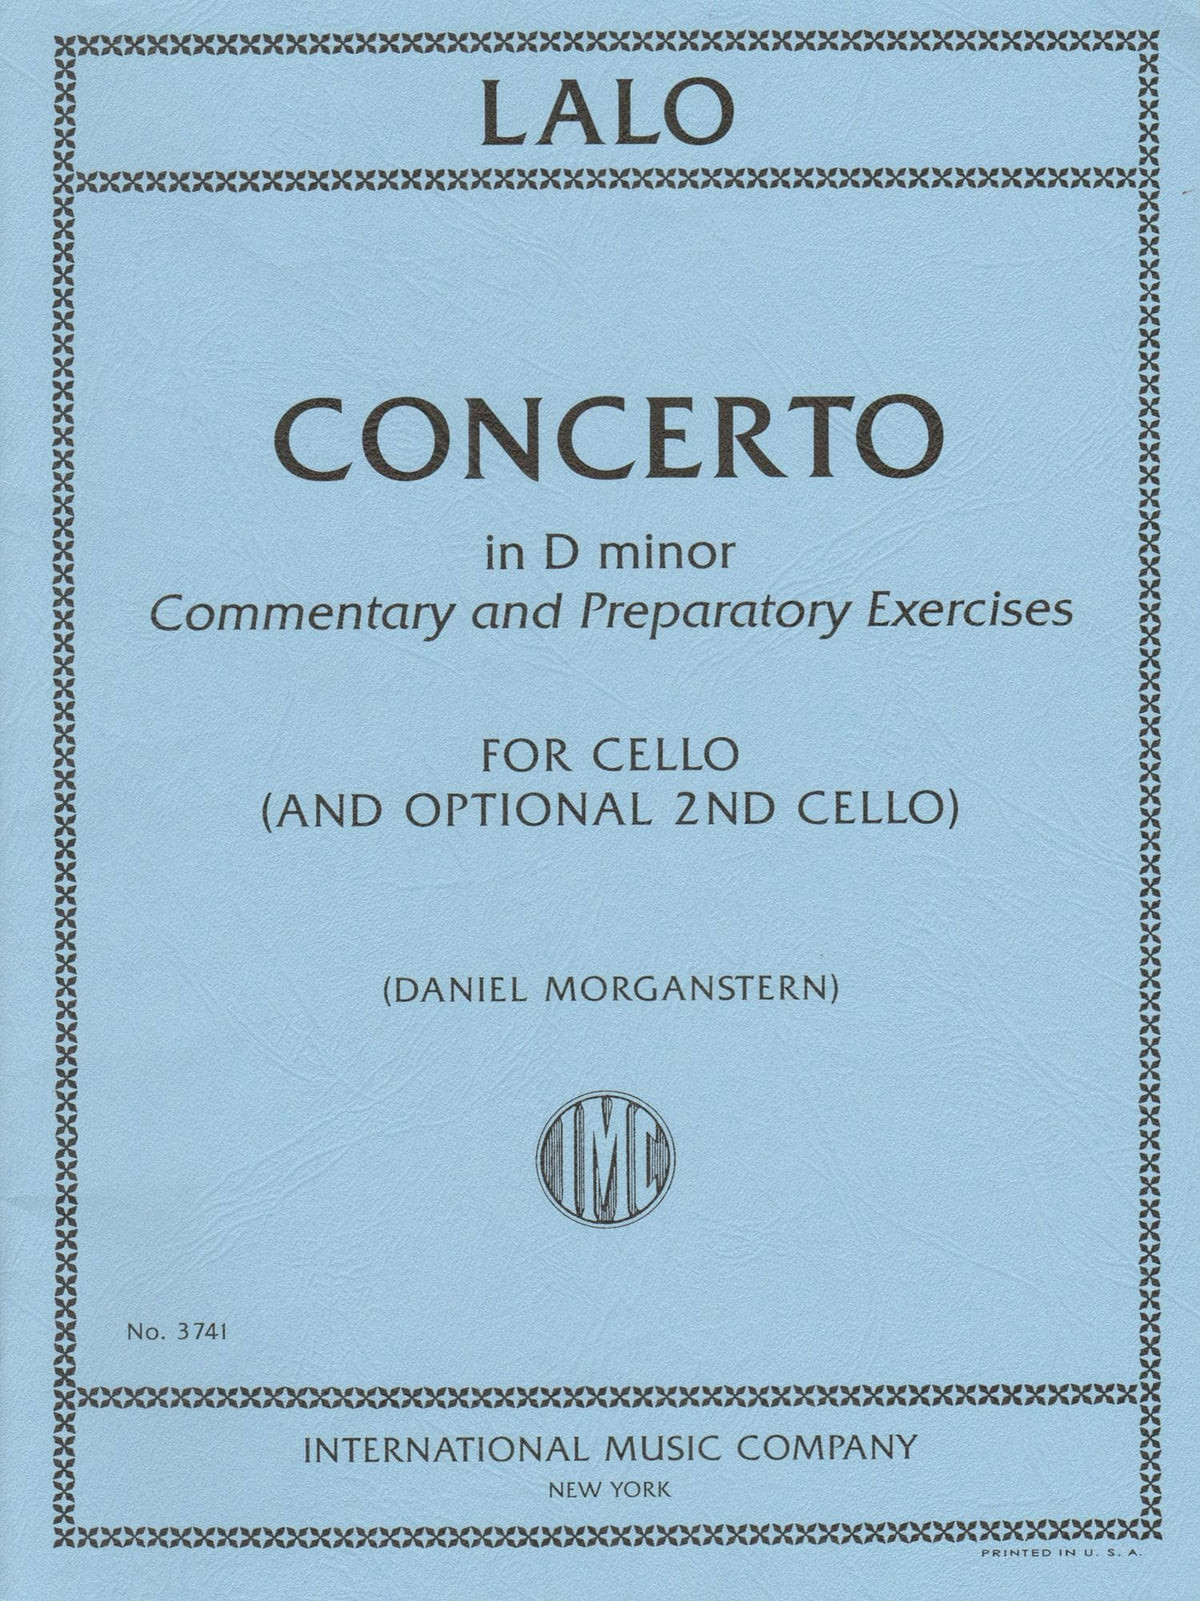 Lalo, Edouard - Concerto in D minor - for Cello - with Optional 2nd Cello, Commentary and Preparatory Exercises by Daniel Morganstern - International